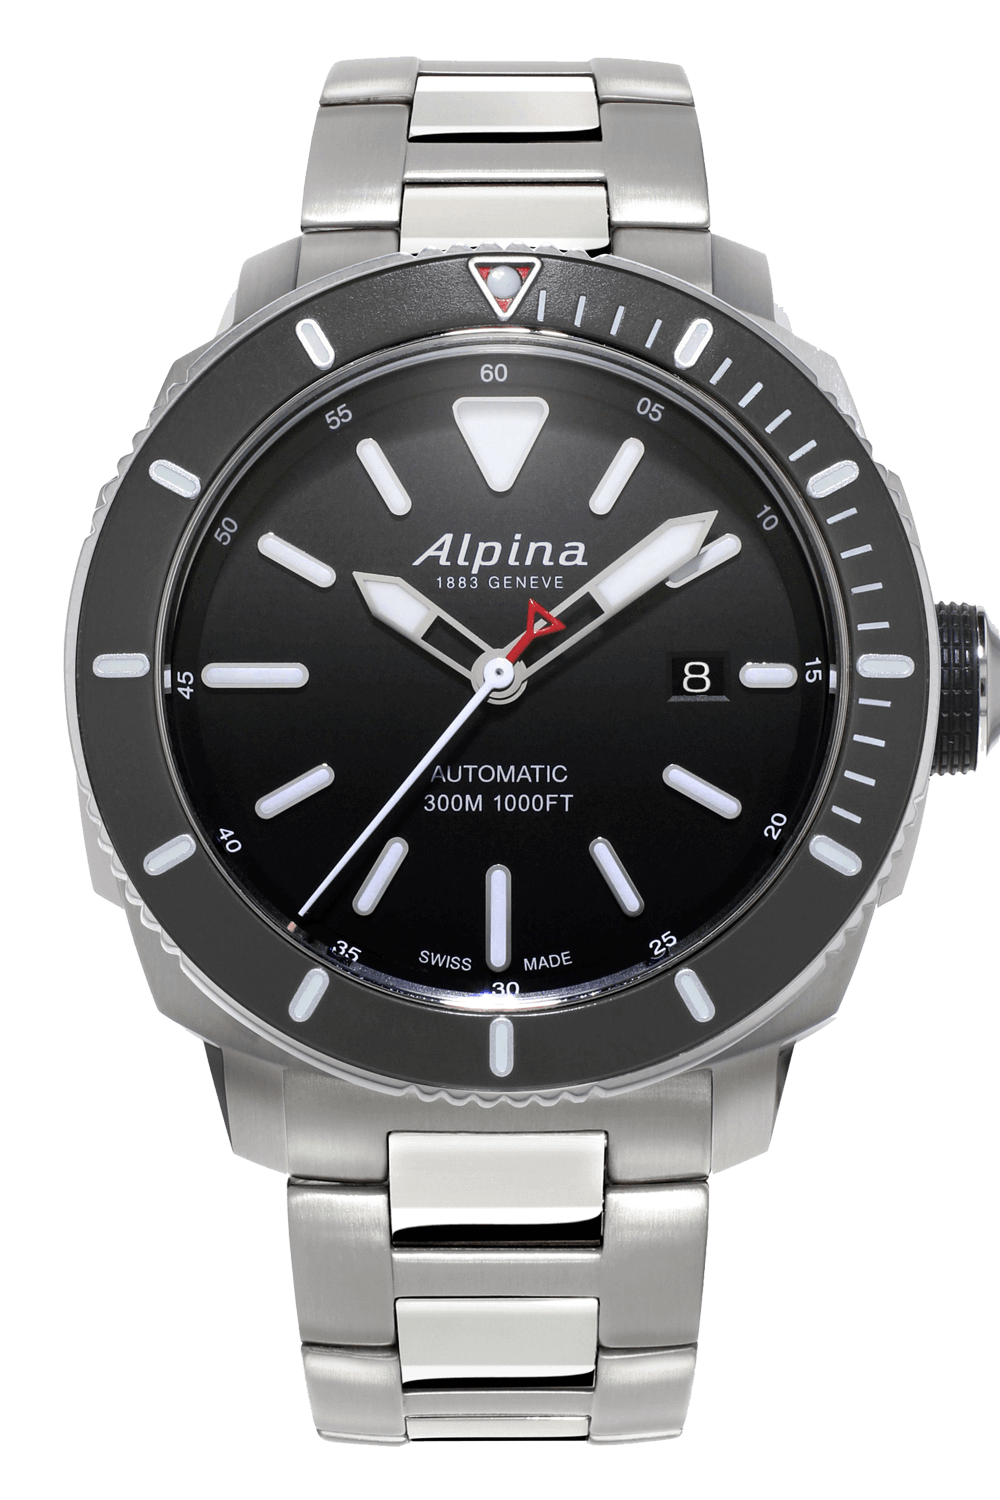 Seastrong Diver 300 (Silver-Black) | Alpina | Luby 